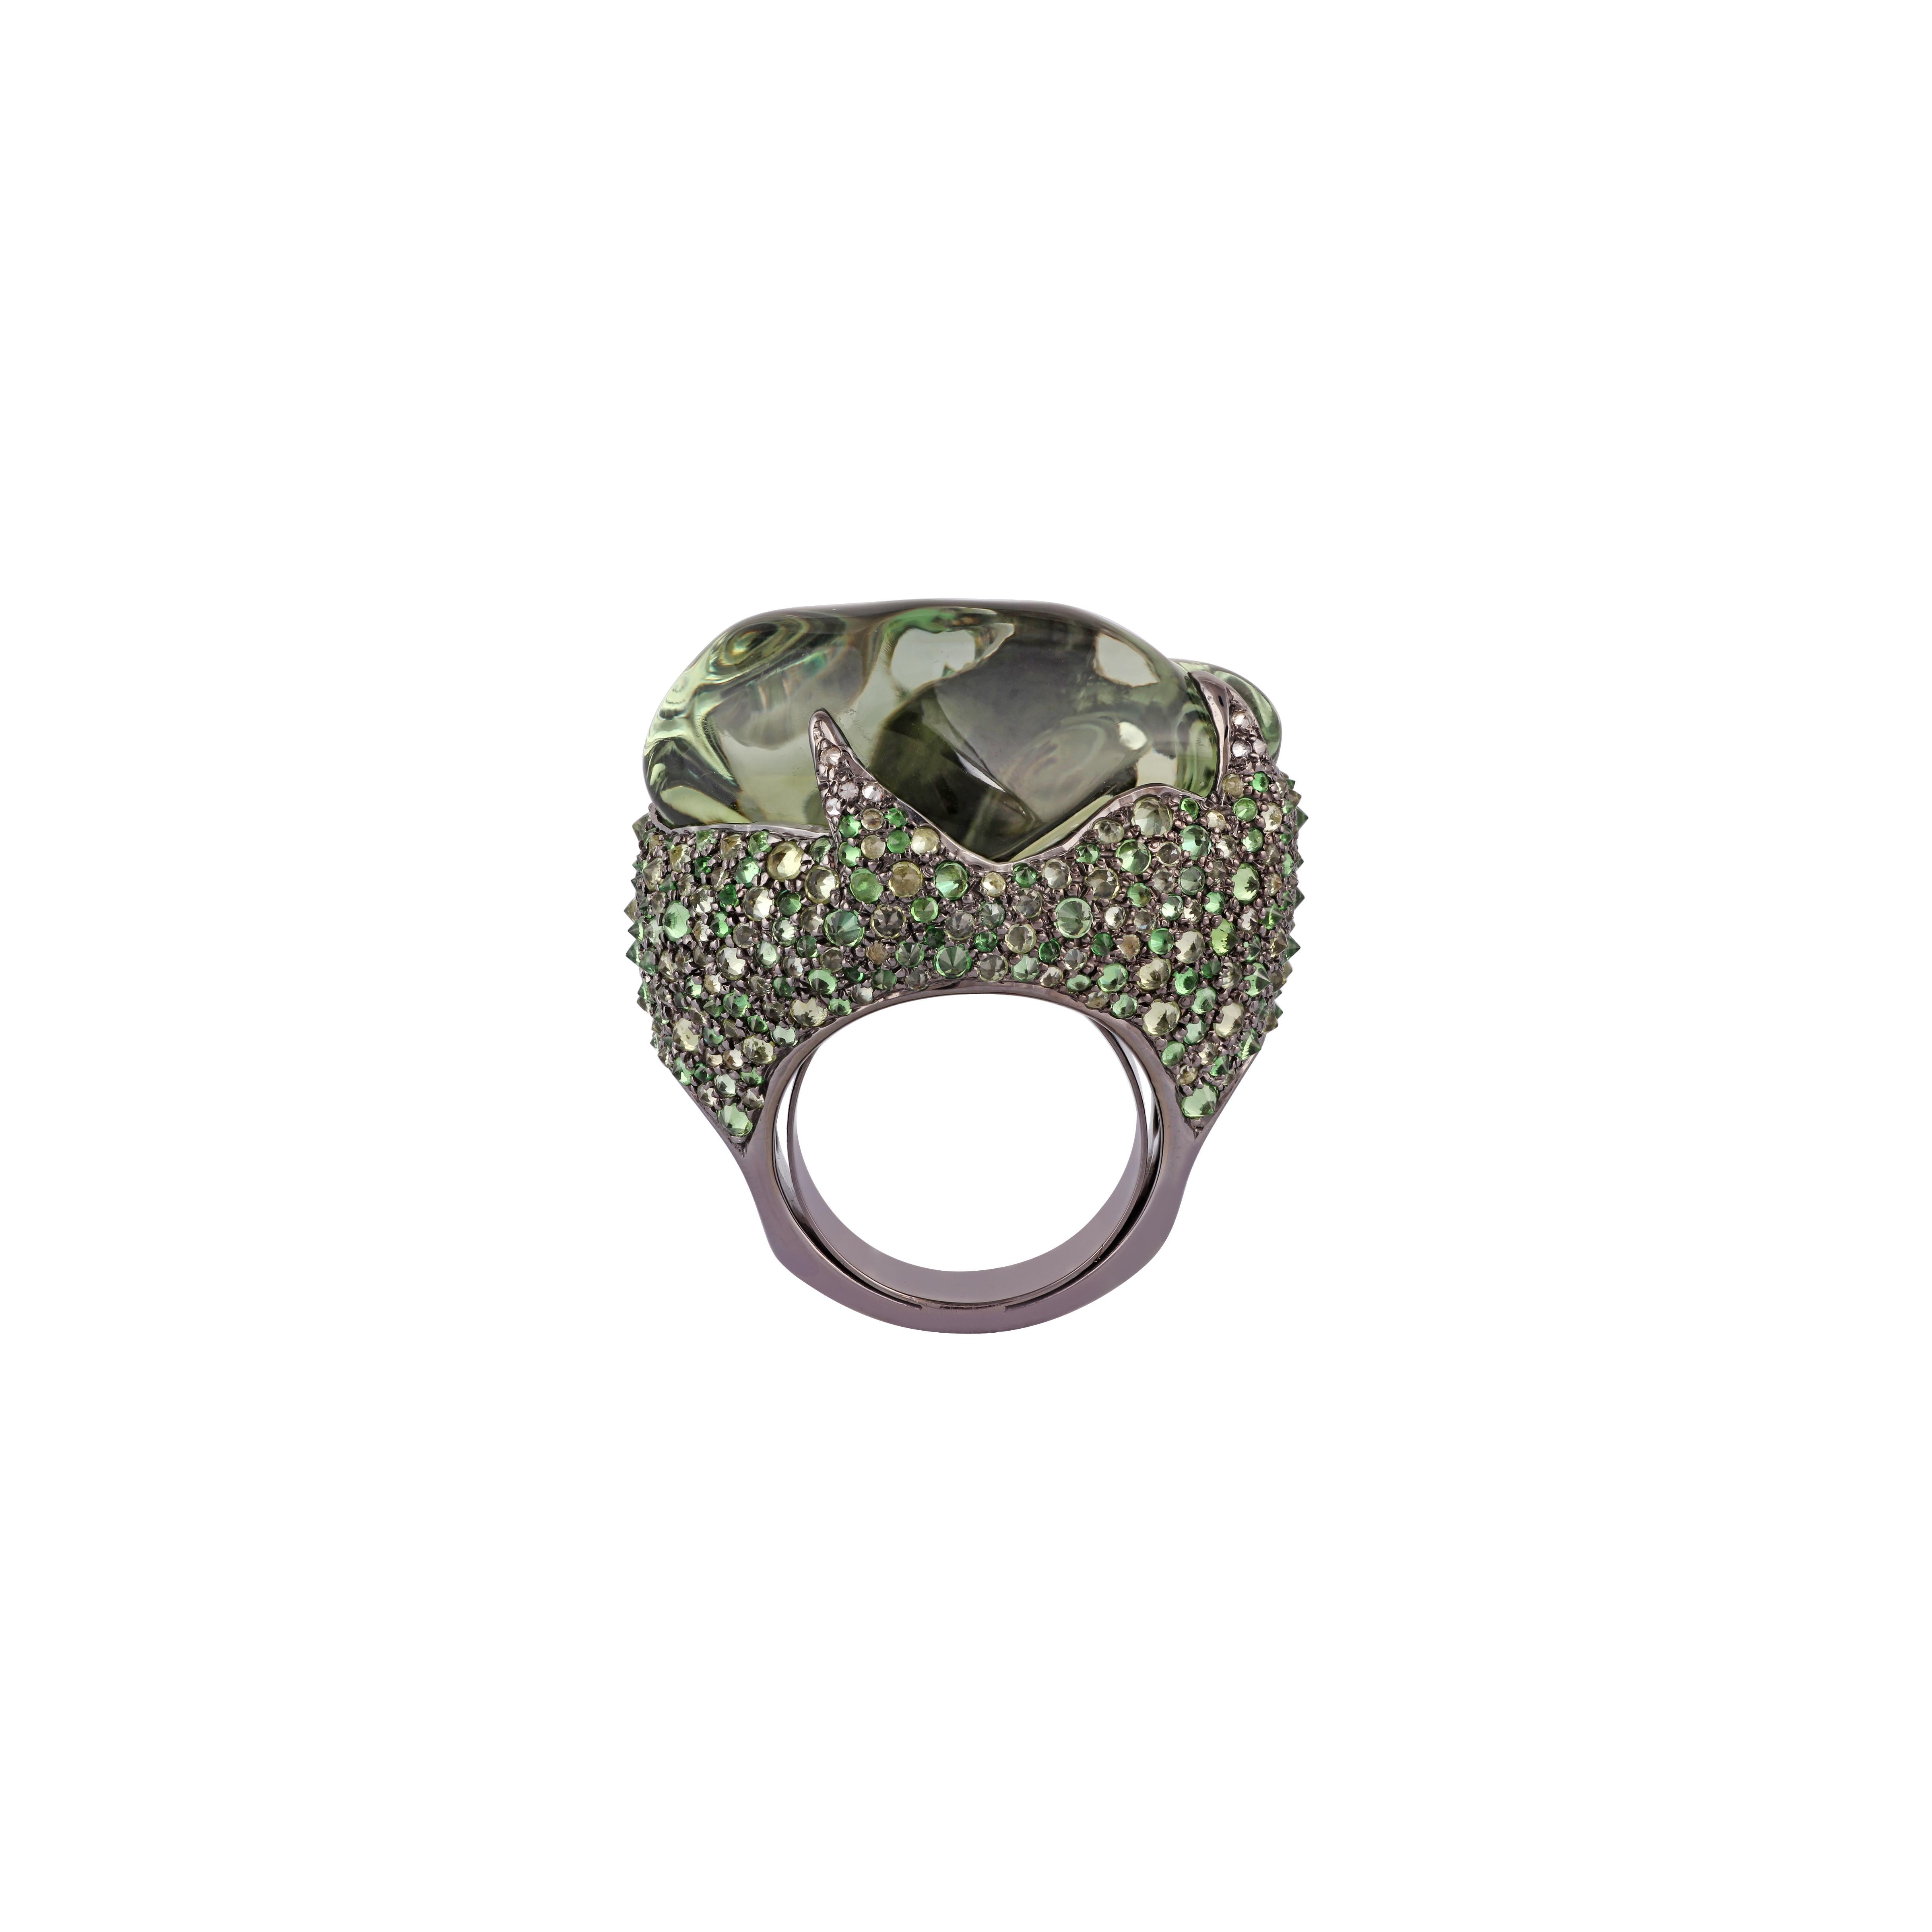 Beautiful Antique Victorian 18K Gold & silver  Tsavorite, Peridot, Green Amethyst, Diamond Ring in 18K Gold & Silver . The center holds a natural vibrant Green Amethyst with an incredible play of color pattern. The Tsavorite & Peridot is surrounded